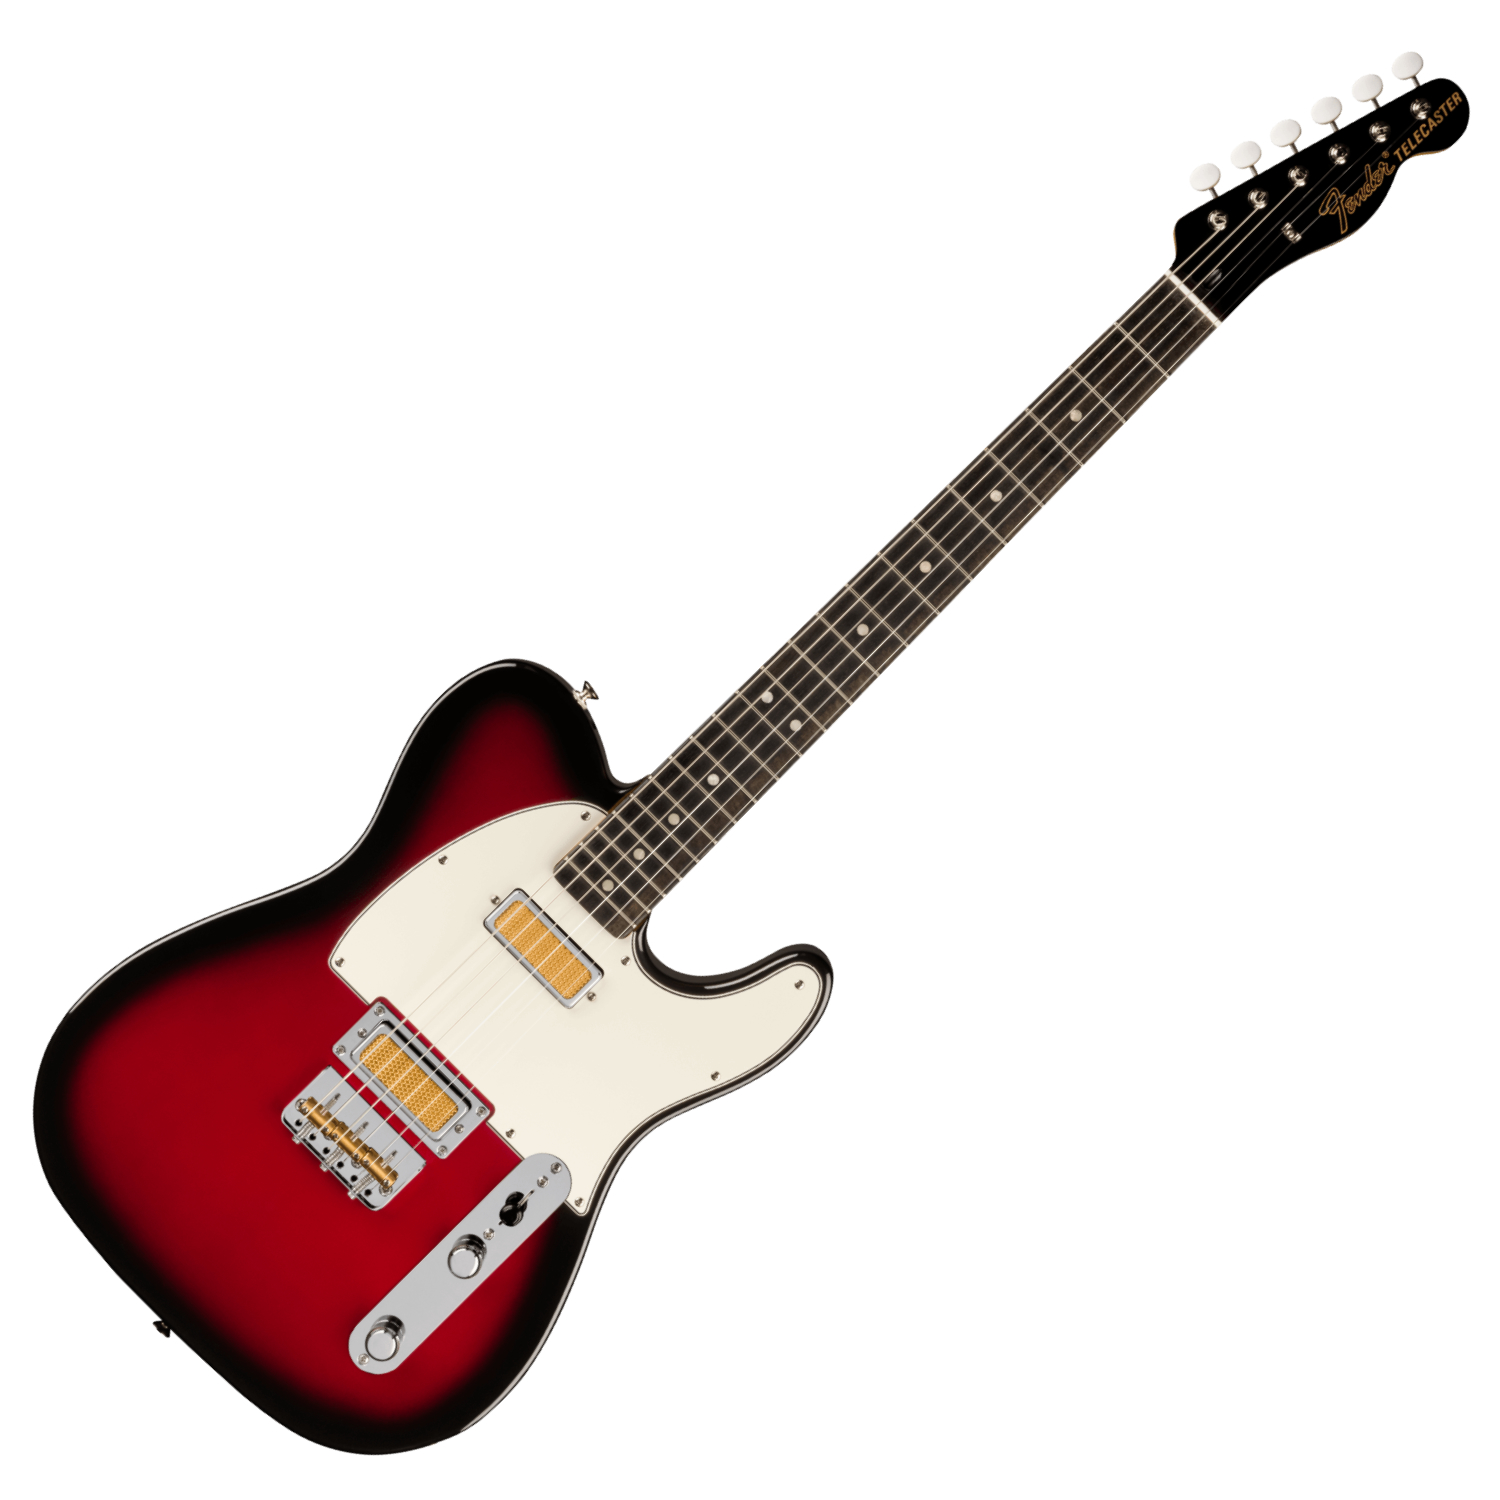 Fenderから新モデル「Gold Foil Collection」シリーズが発売！